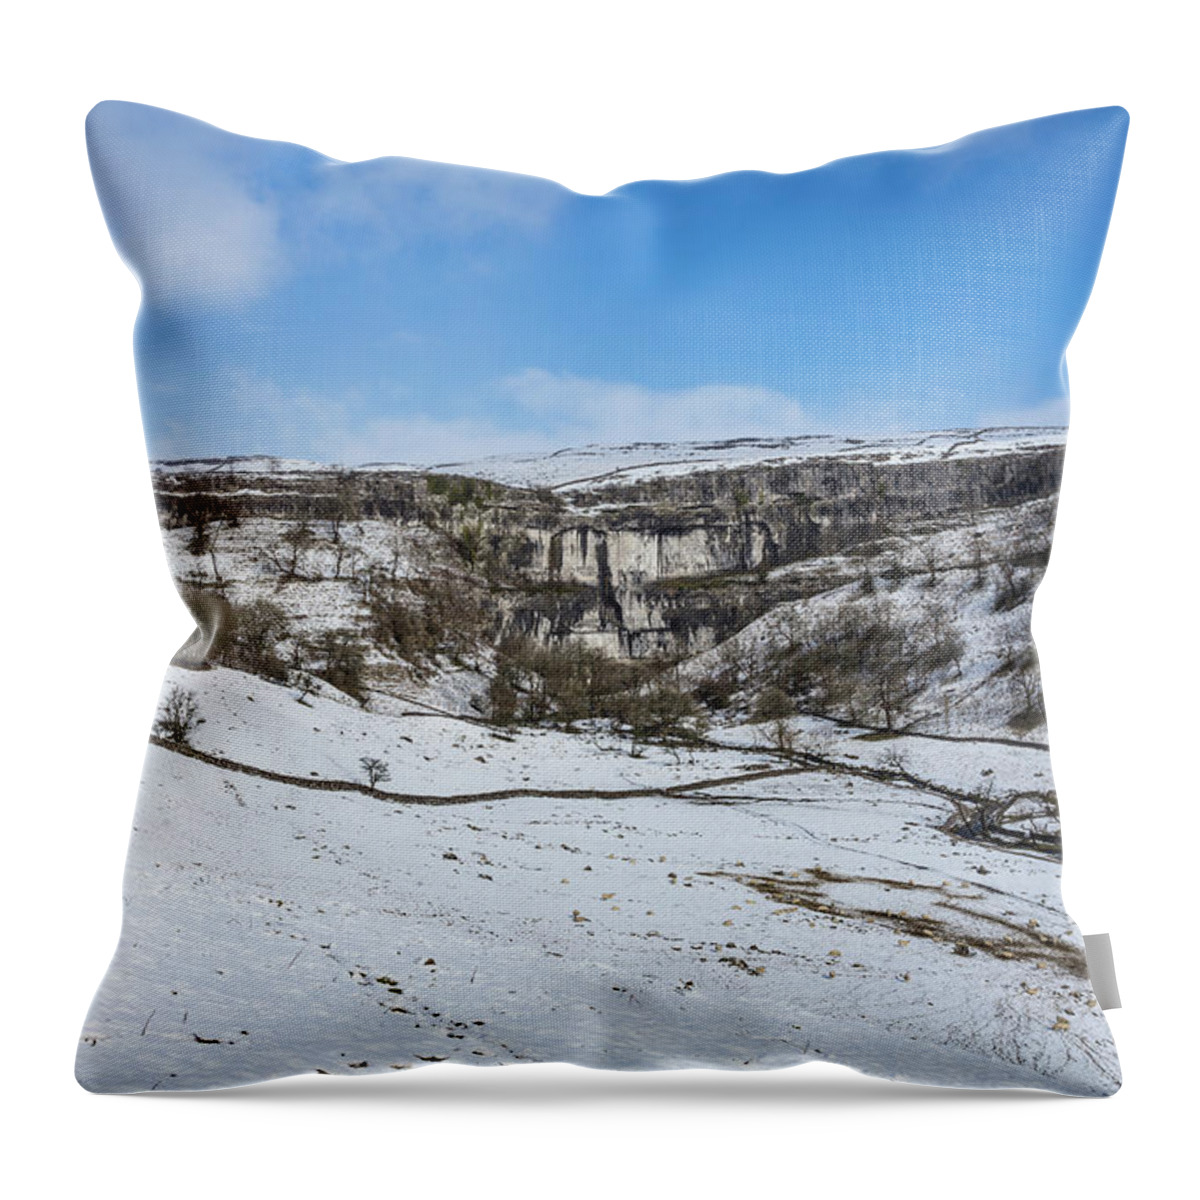 Uk Throw Pillow featuring the photograph Malham Cove, Yorkshire Dales by Tom Holmes Photography